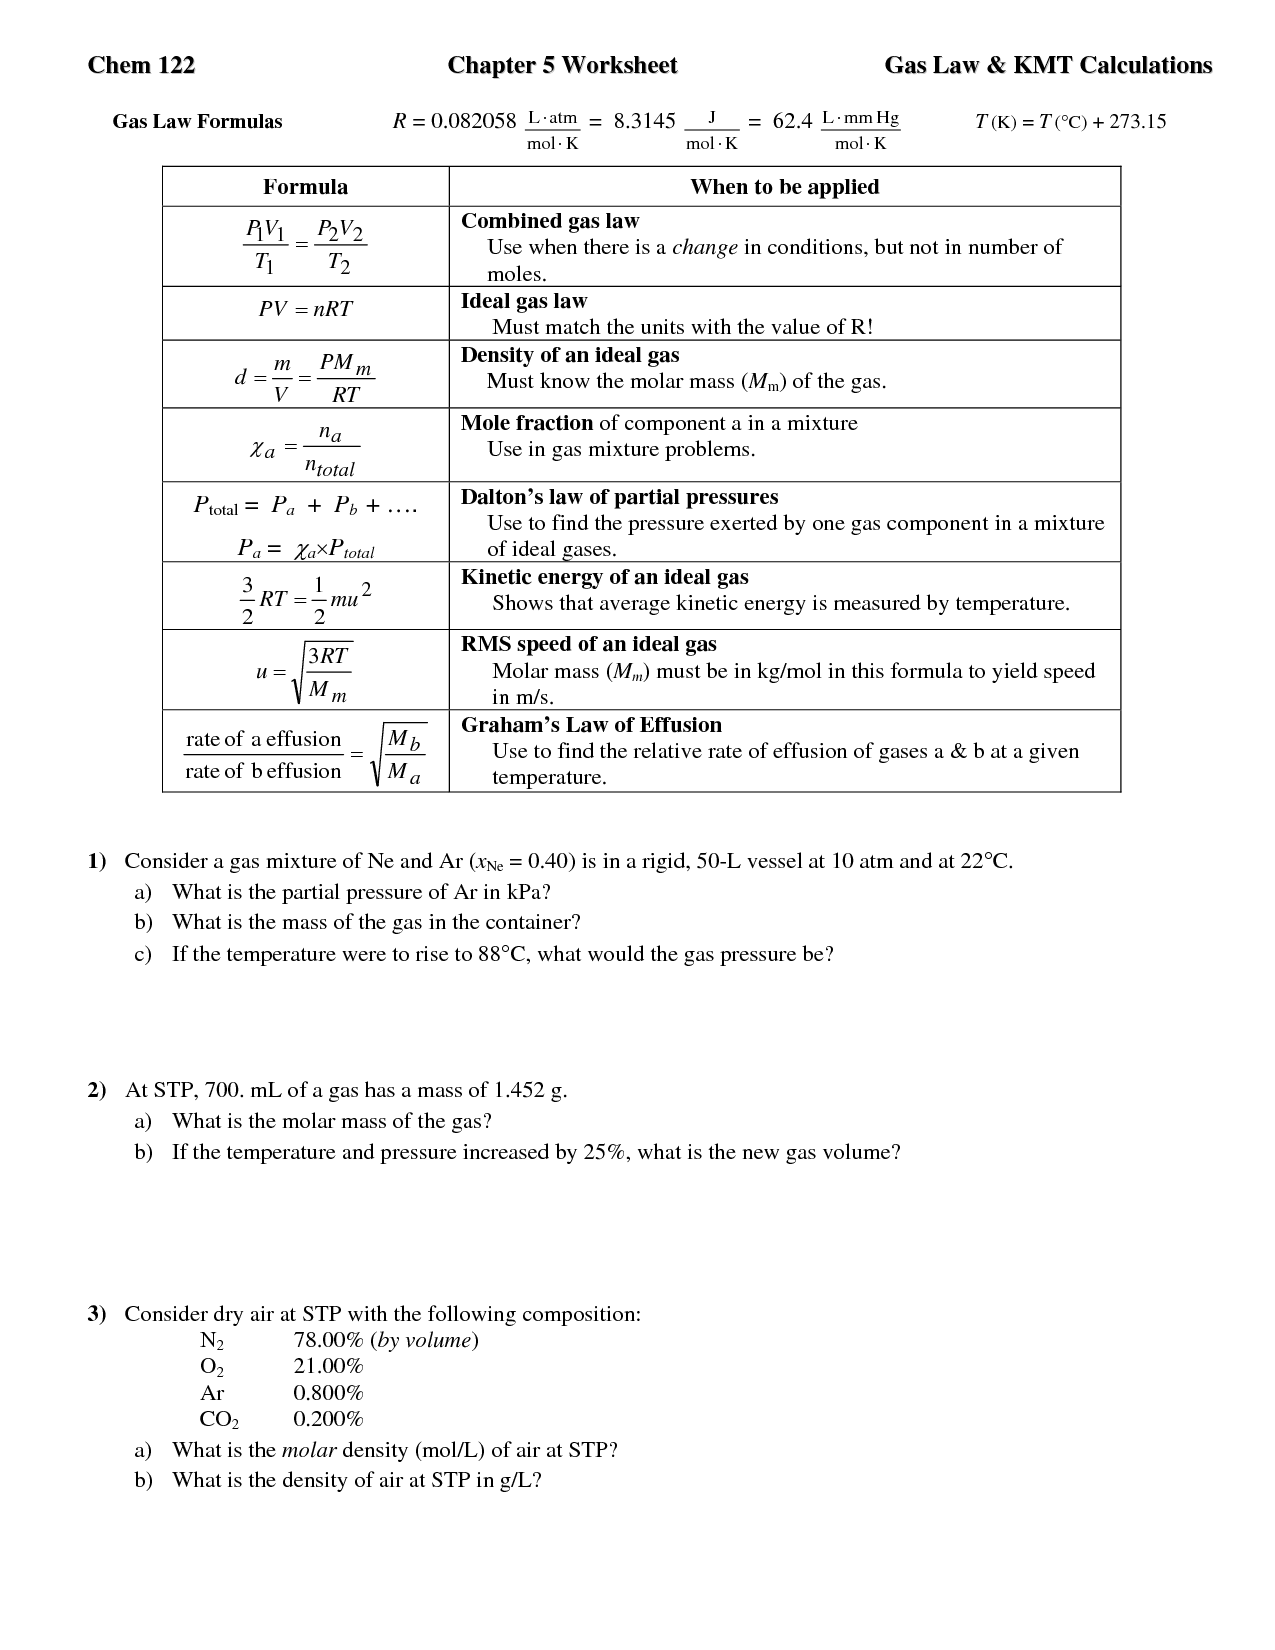 15 Best Images of Ideal Gas Law Worksheet  Ideal Gas Law Worksheet Answers, Ideal Gas Law 